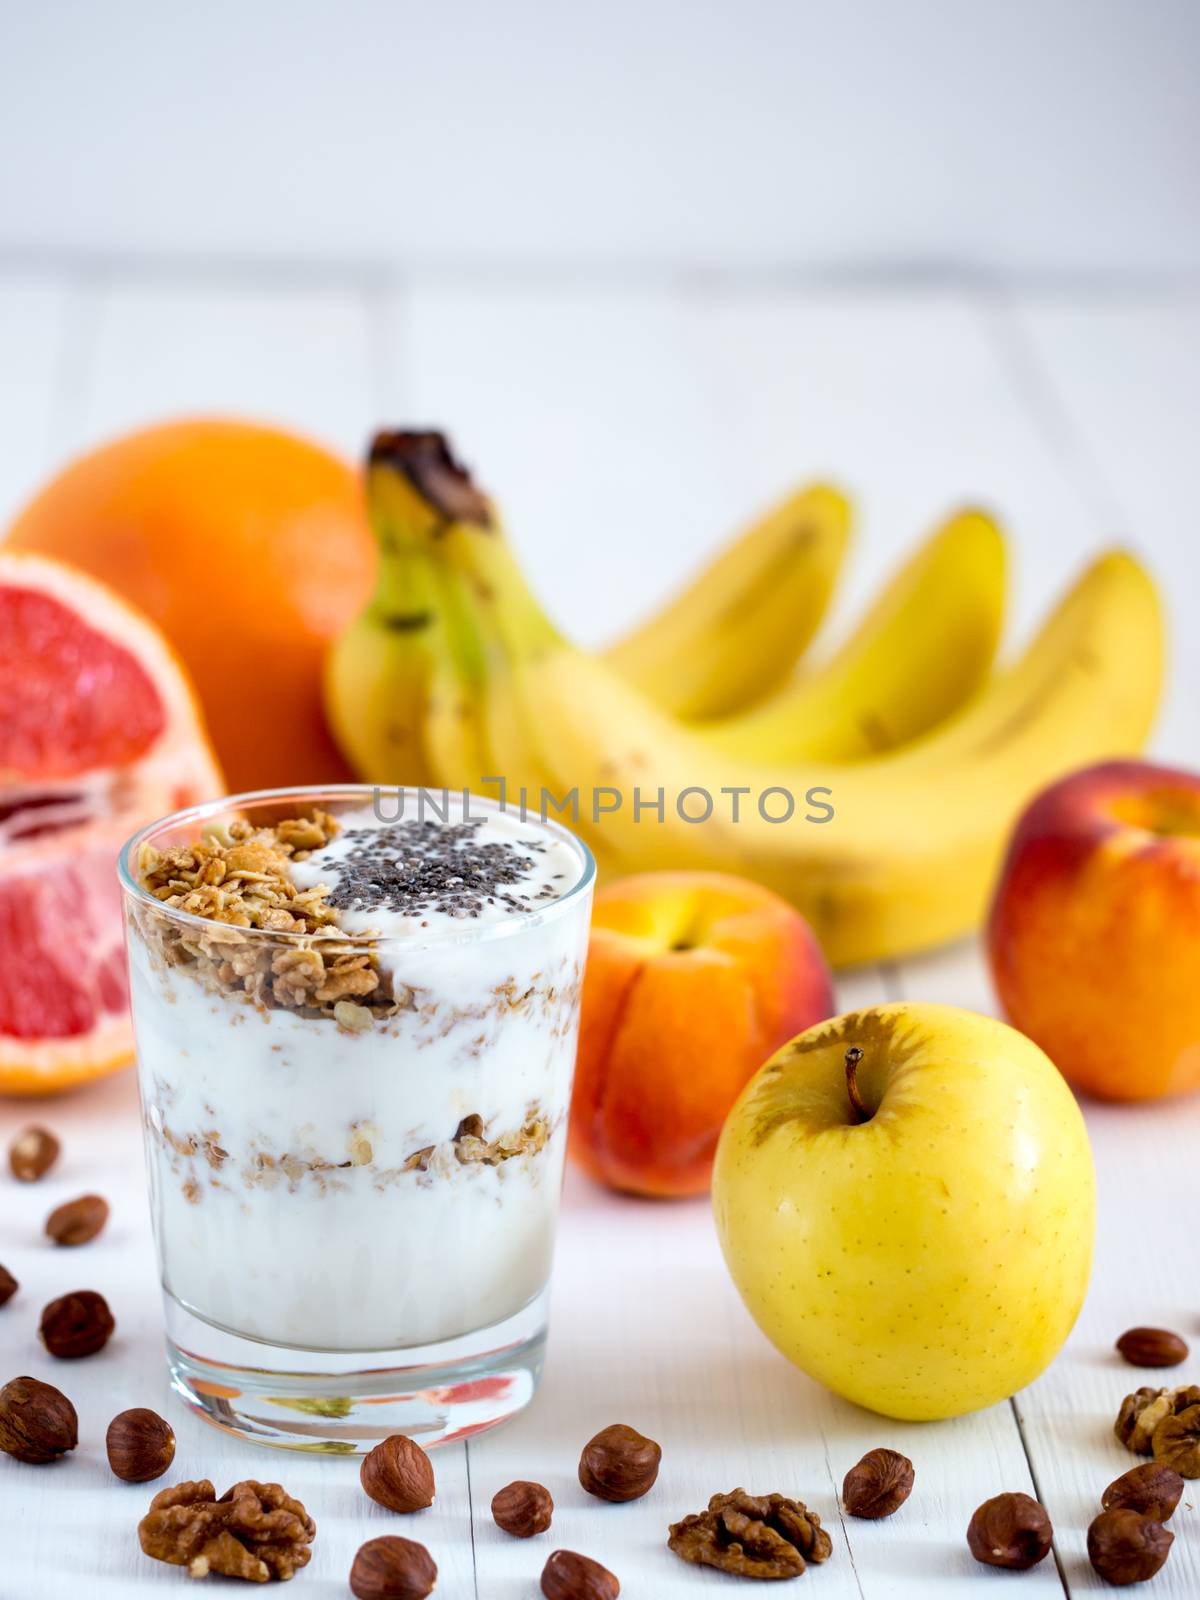 Healthy breakfast: yogurt with muesli and chia seeds, fruits and nuts on white wooden background. Dieting, healthy lifestyle concept meal. Vertical with copyspace